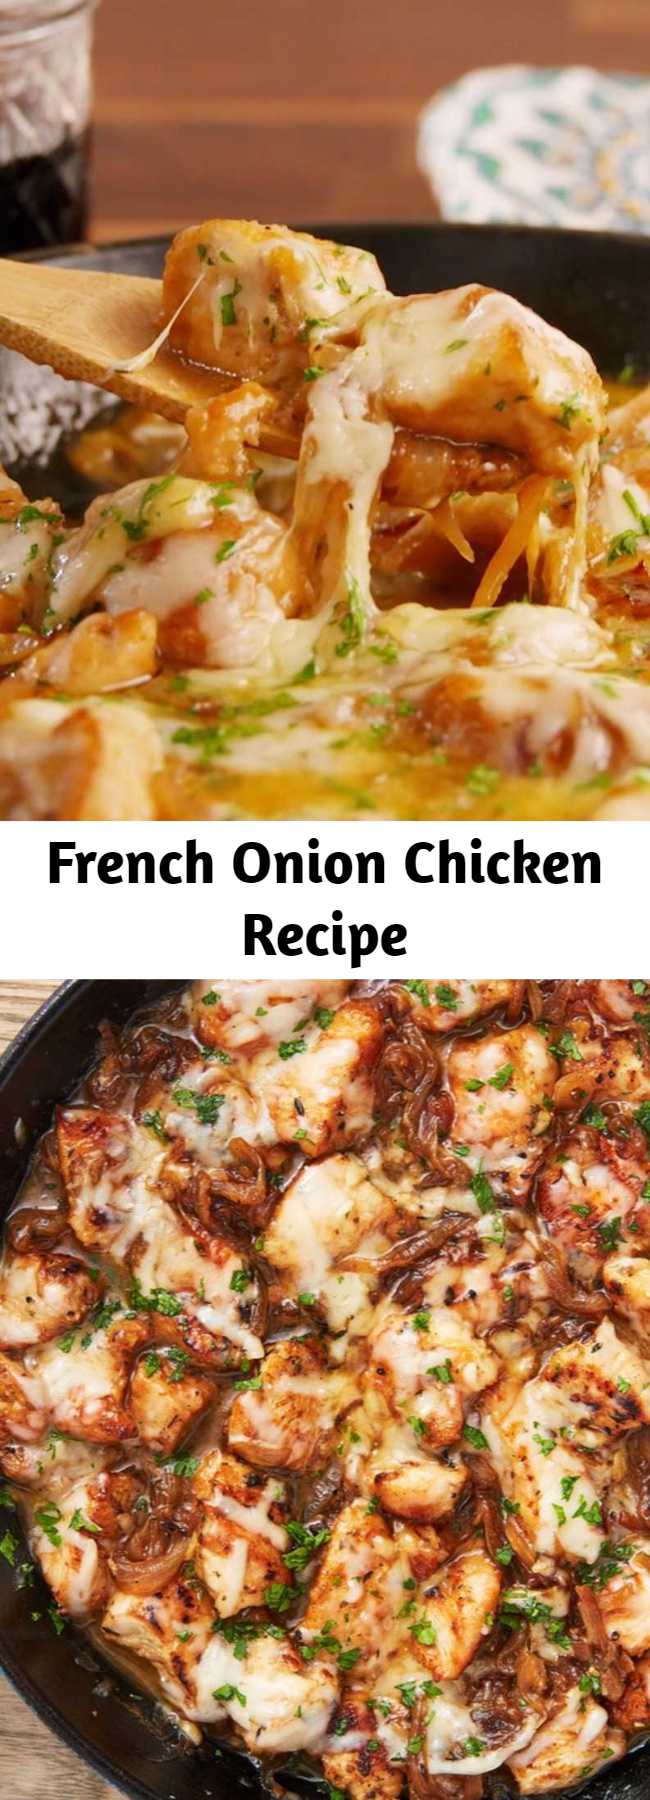 French Onion Chicken Recipe - We love that this recipe comes together in one skillet and in less than an hour, meaning it's WAY faster than French Onion Soup. Dunking good bread into the extra pan sauce is highly encouraged. #easy #recipe #french #onion #chicken #frenchonion #soup #meals #dinner #cozy #comfortfood